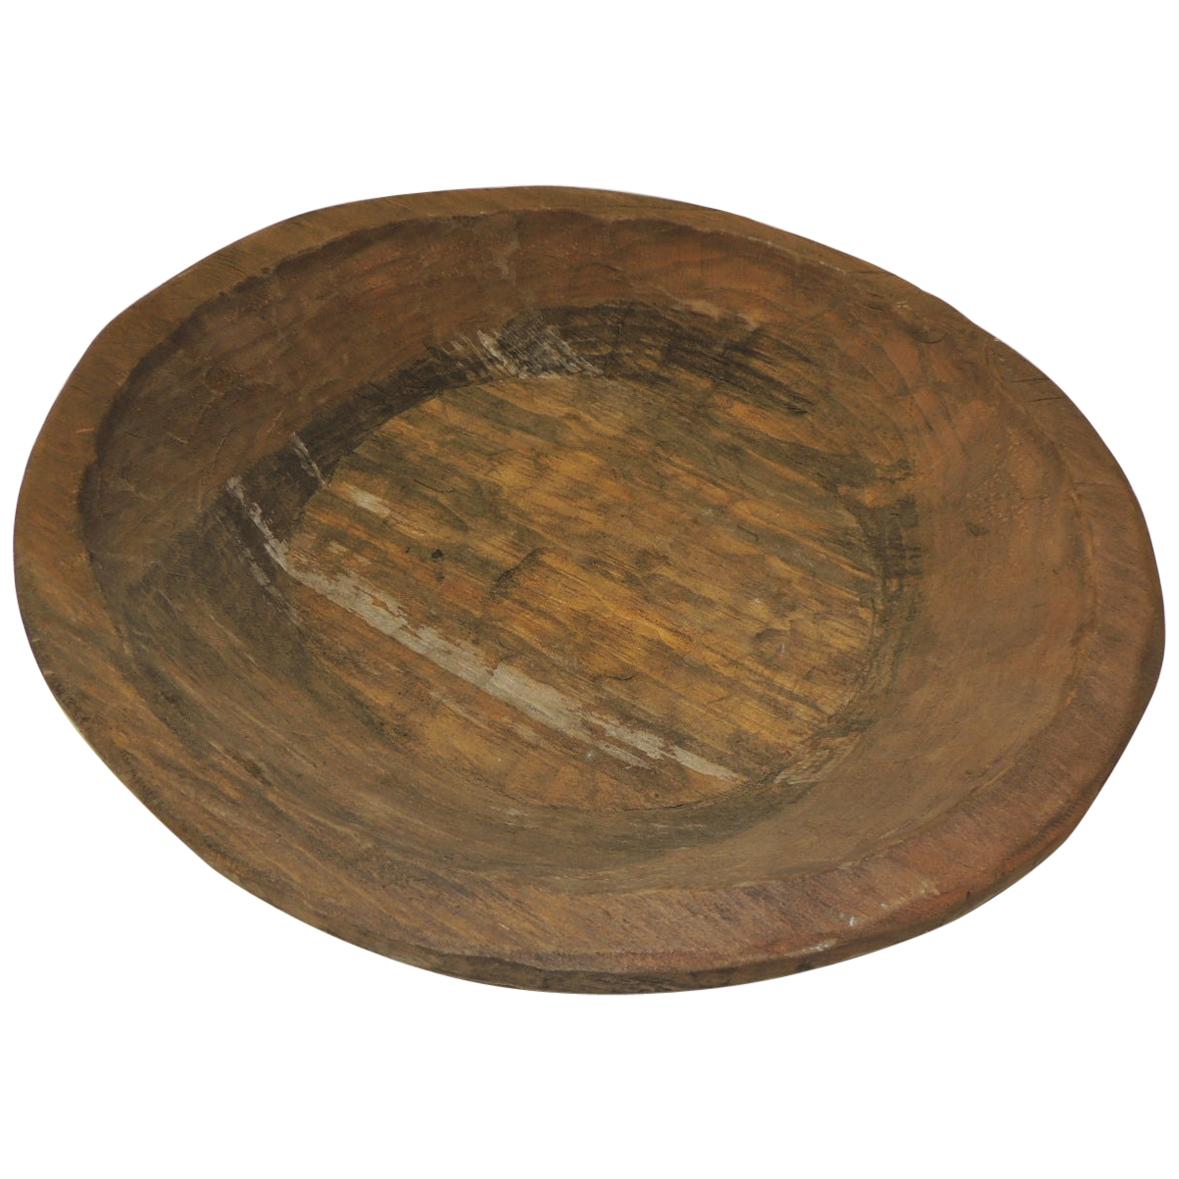 Primitive Mexican Round Hand Carved Rustic Bowl